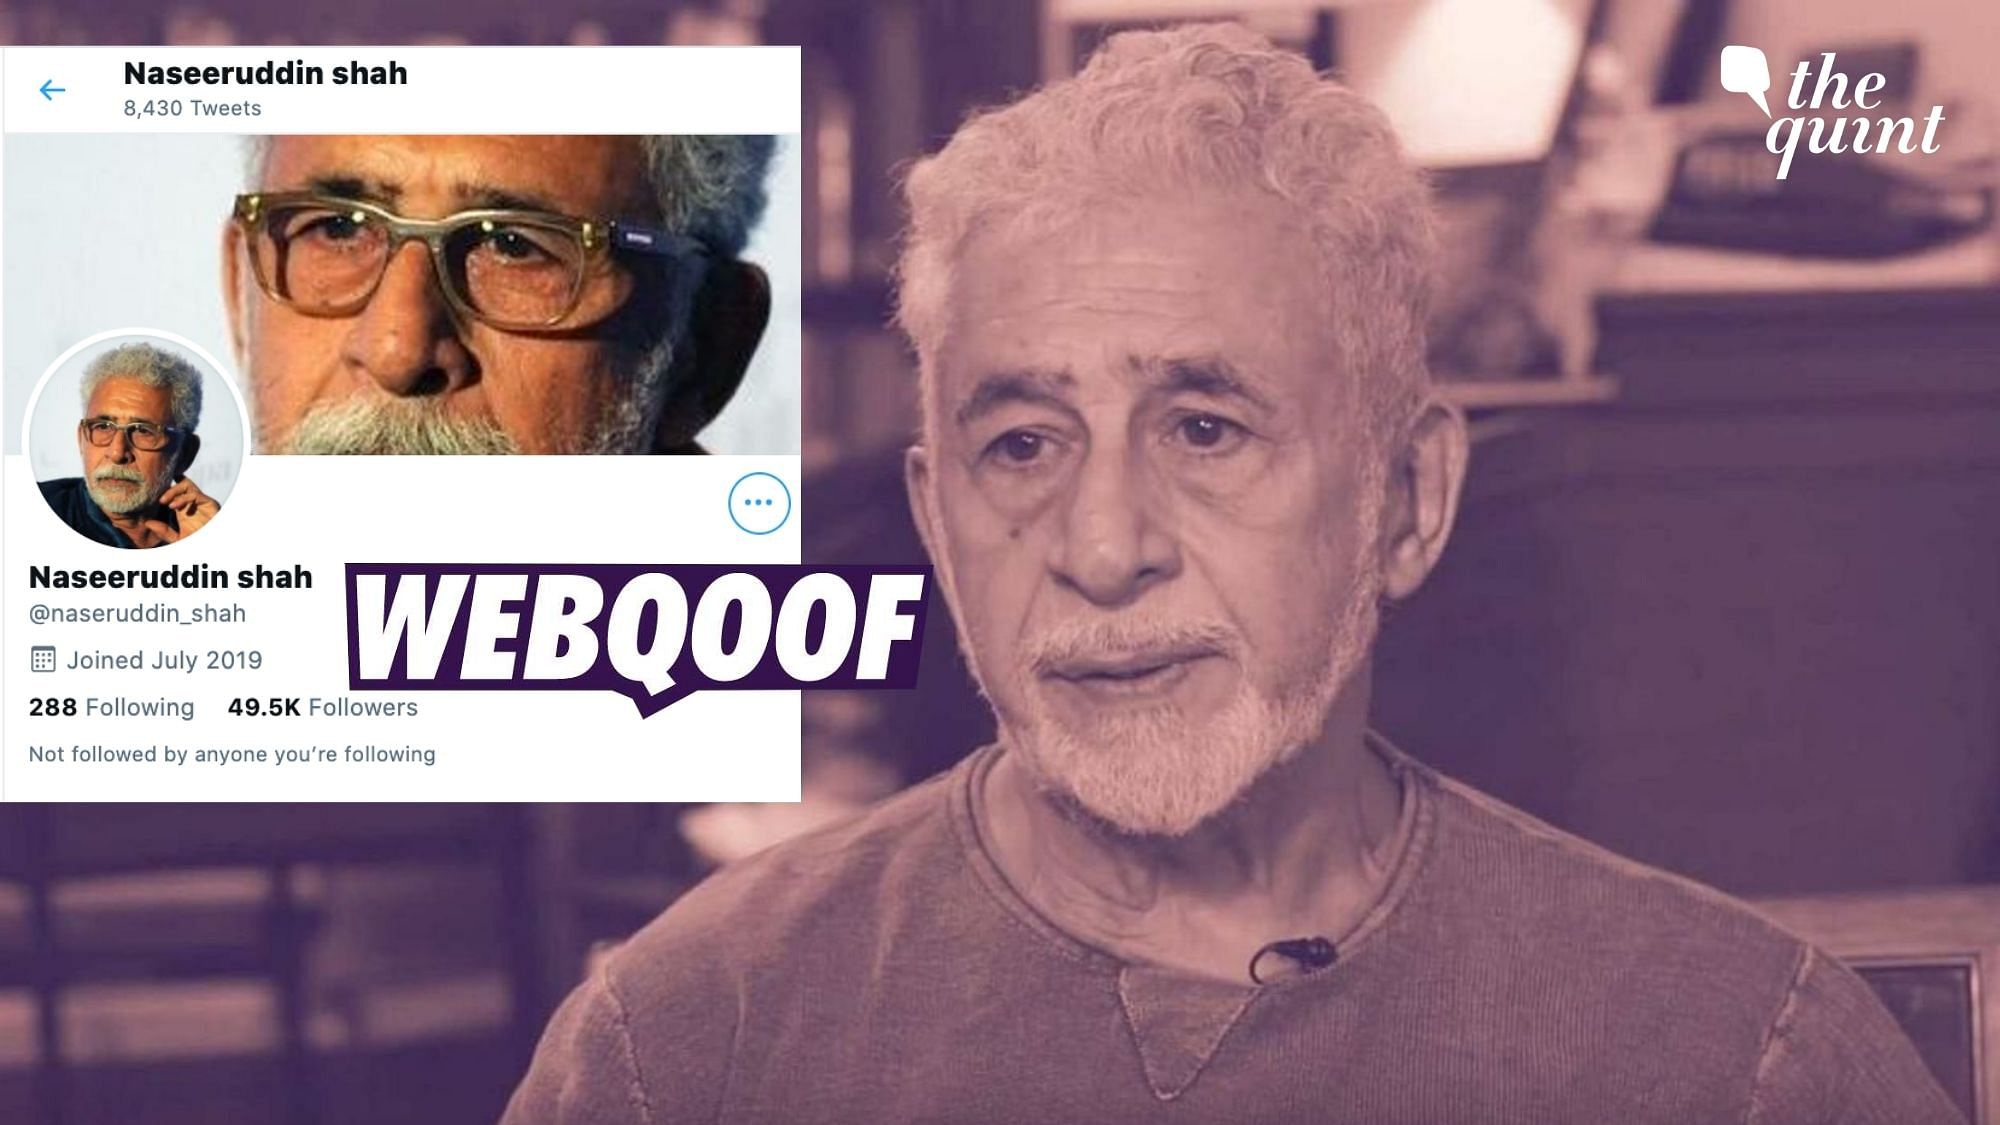 ‘@naseruddin_shah’ is an imposter Twitter account of Bollywood actor Naseeruddin Shah.